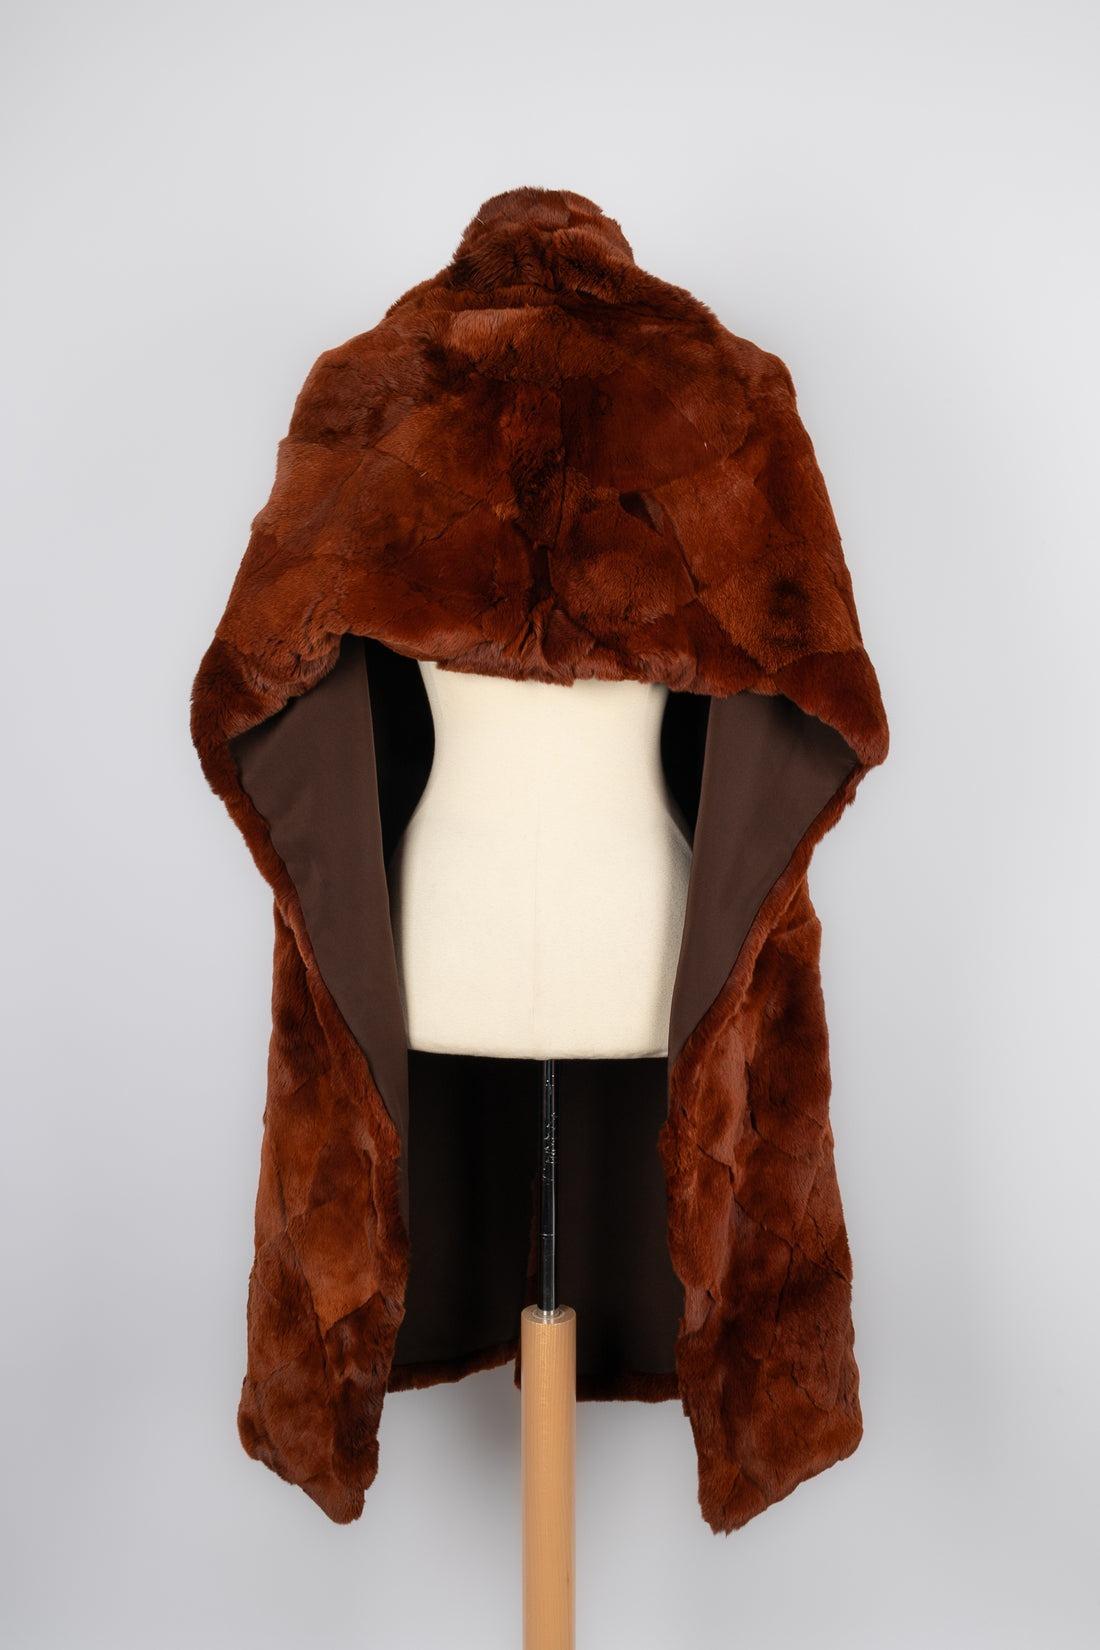 Women's Chanel Fur Large Stole in Copper-Brown Orylag with a Brown Silk Lining For Sale